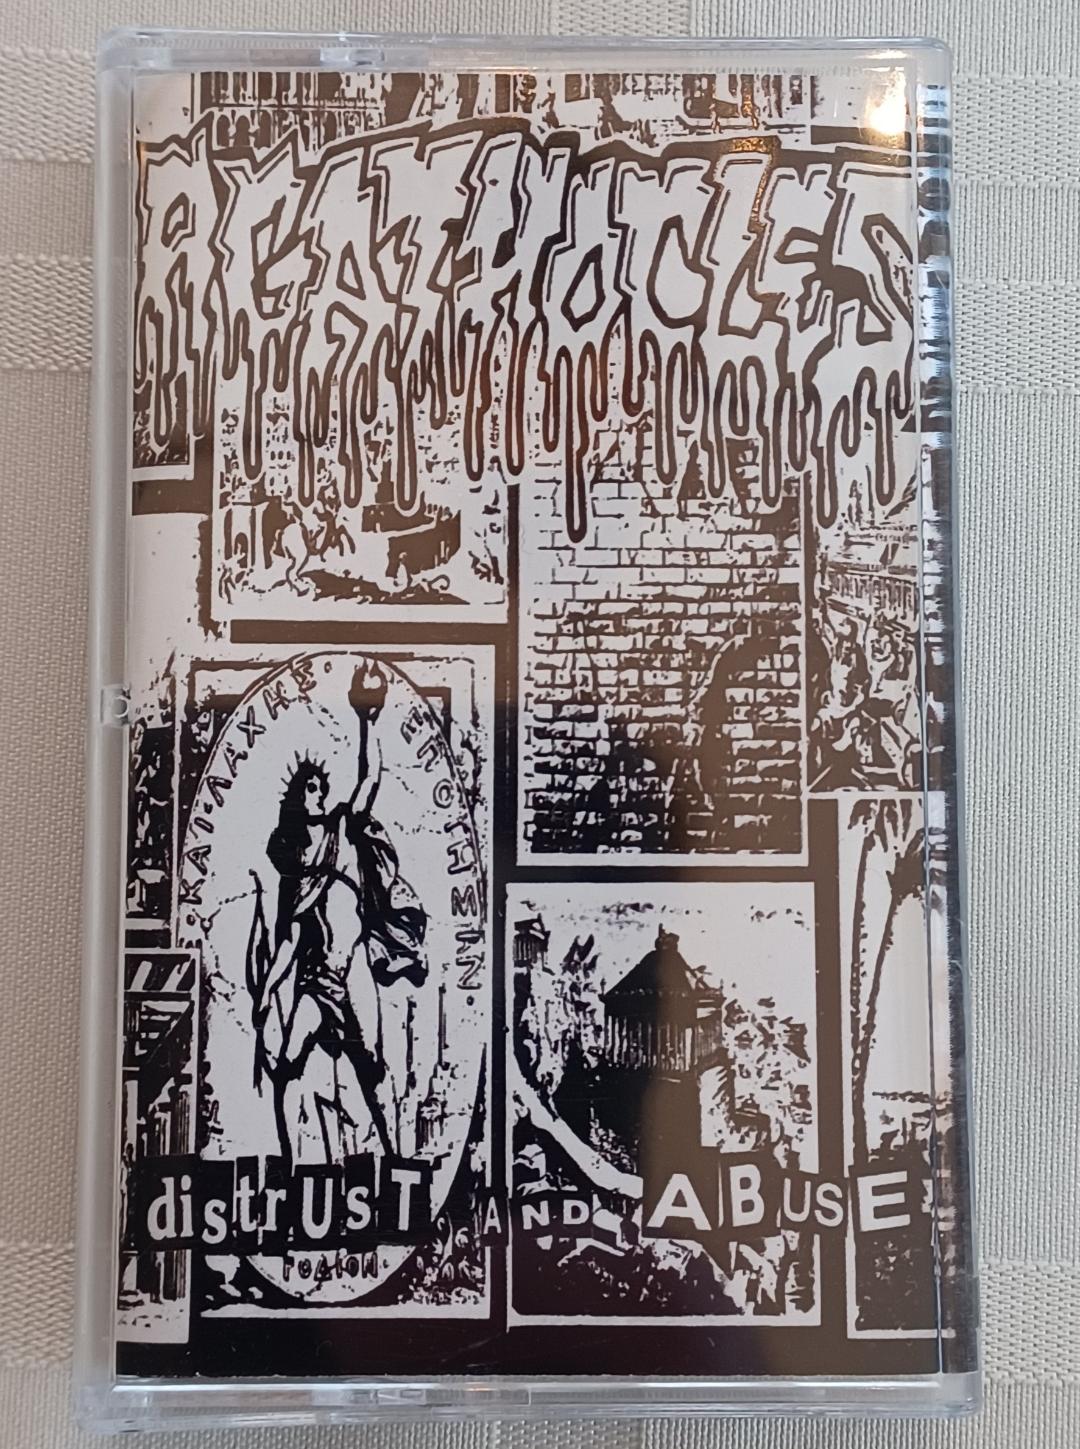 AGATHOCLES - "DISTRUST AND ABUSE / AGARCHY"